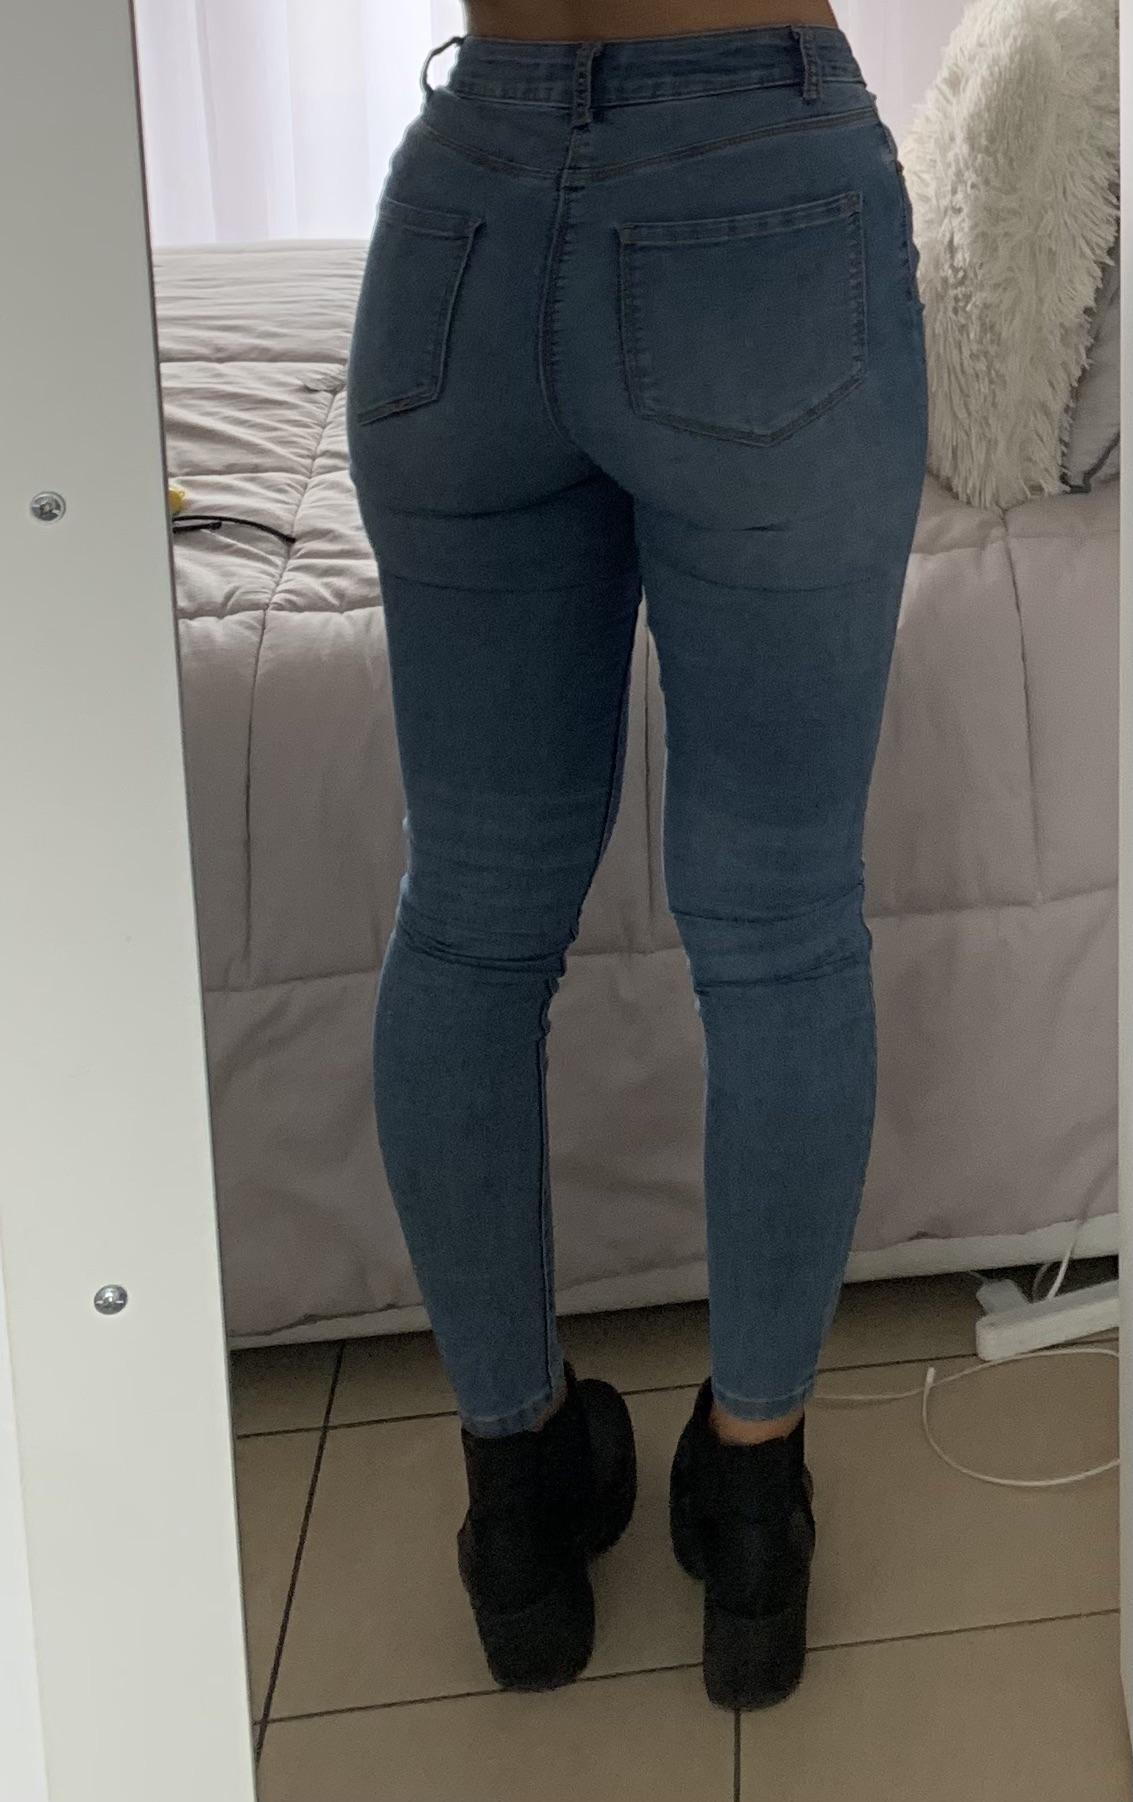 Fave Pair Of Jeans 🥰 Scrolller